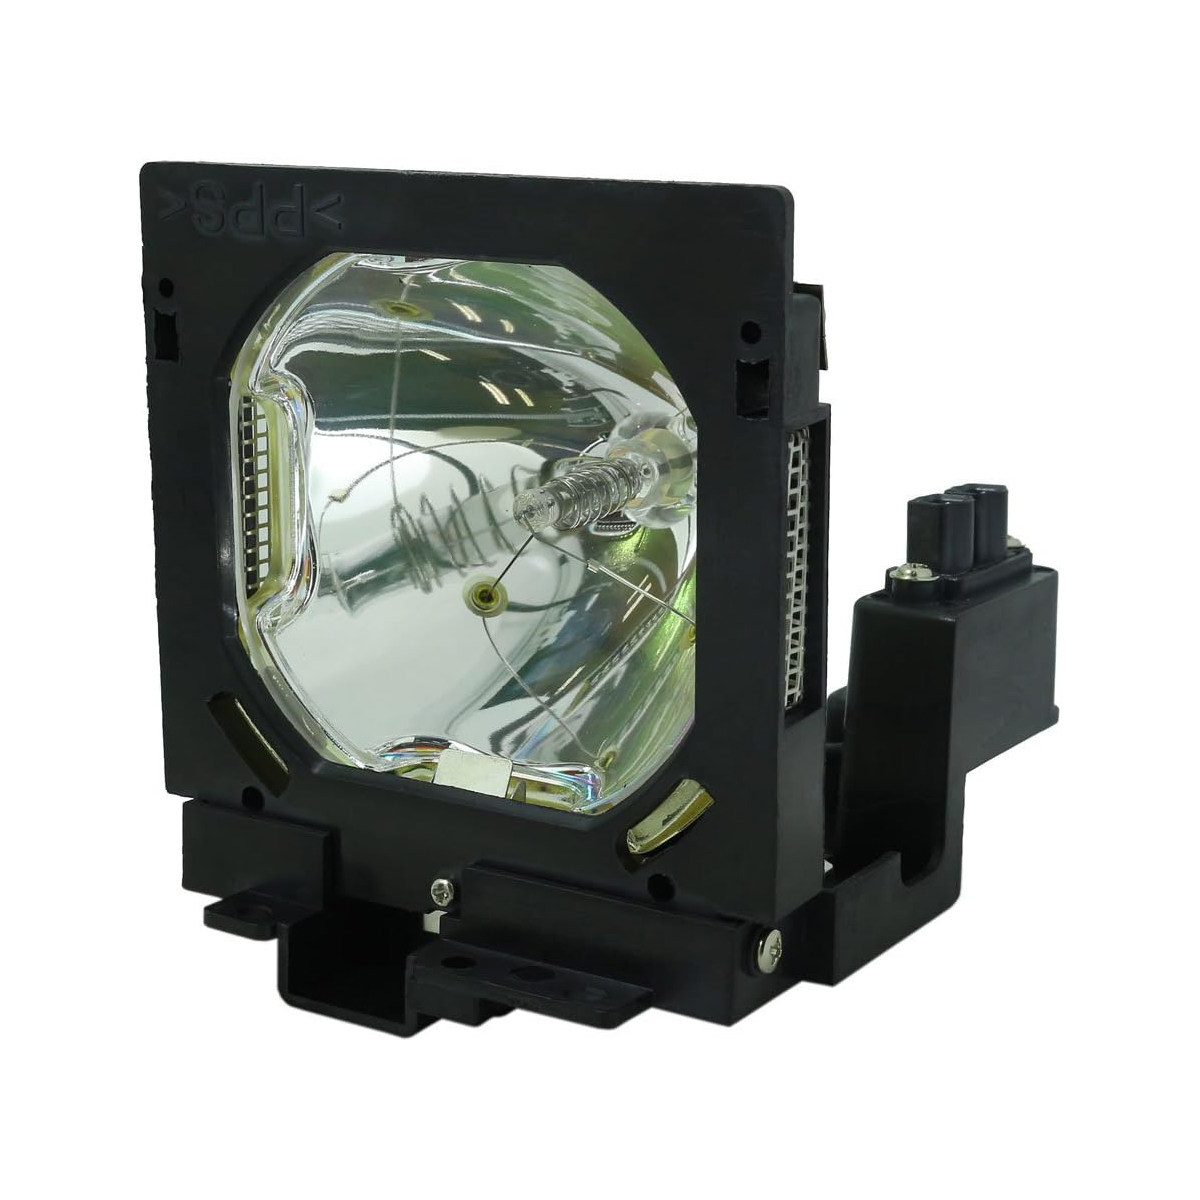 Replacement Projector lamp 456-230 For Dukane Projector